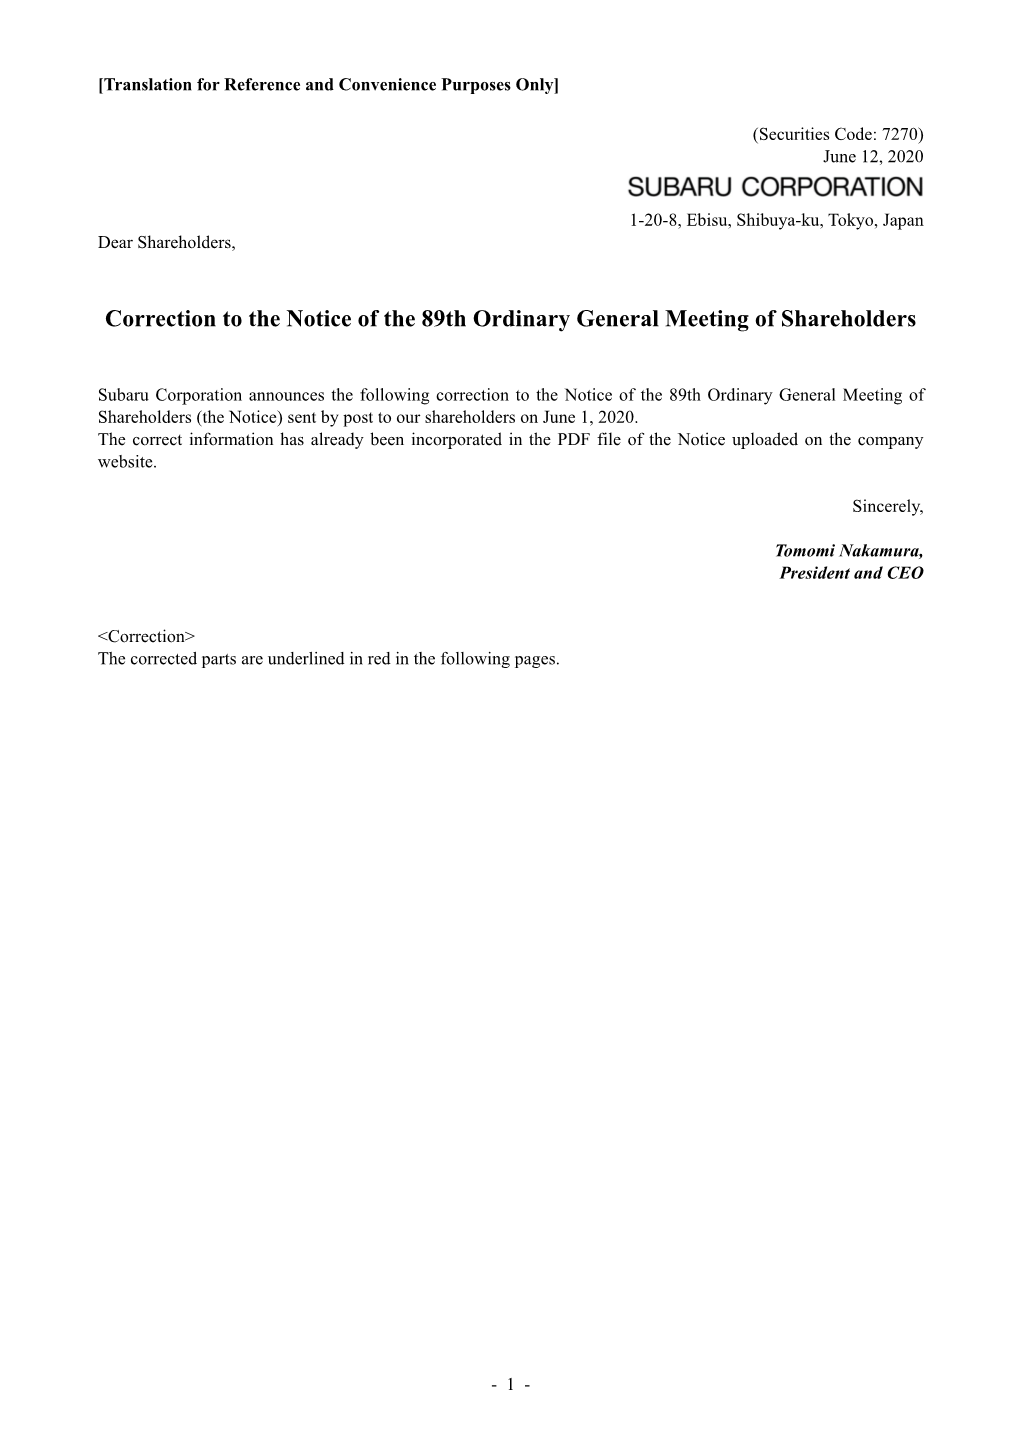 Correction to the Notice of the 89Th Ordinary General Meeting of Shareholders